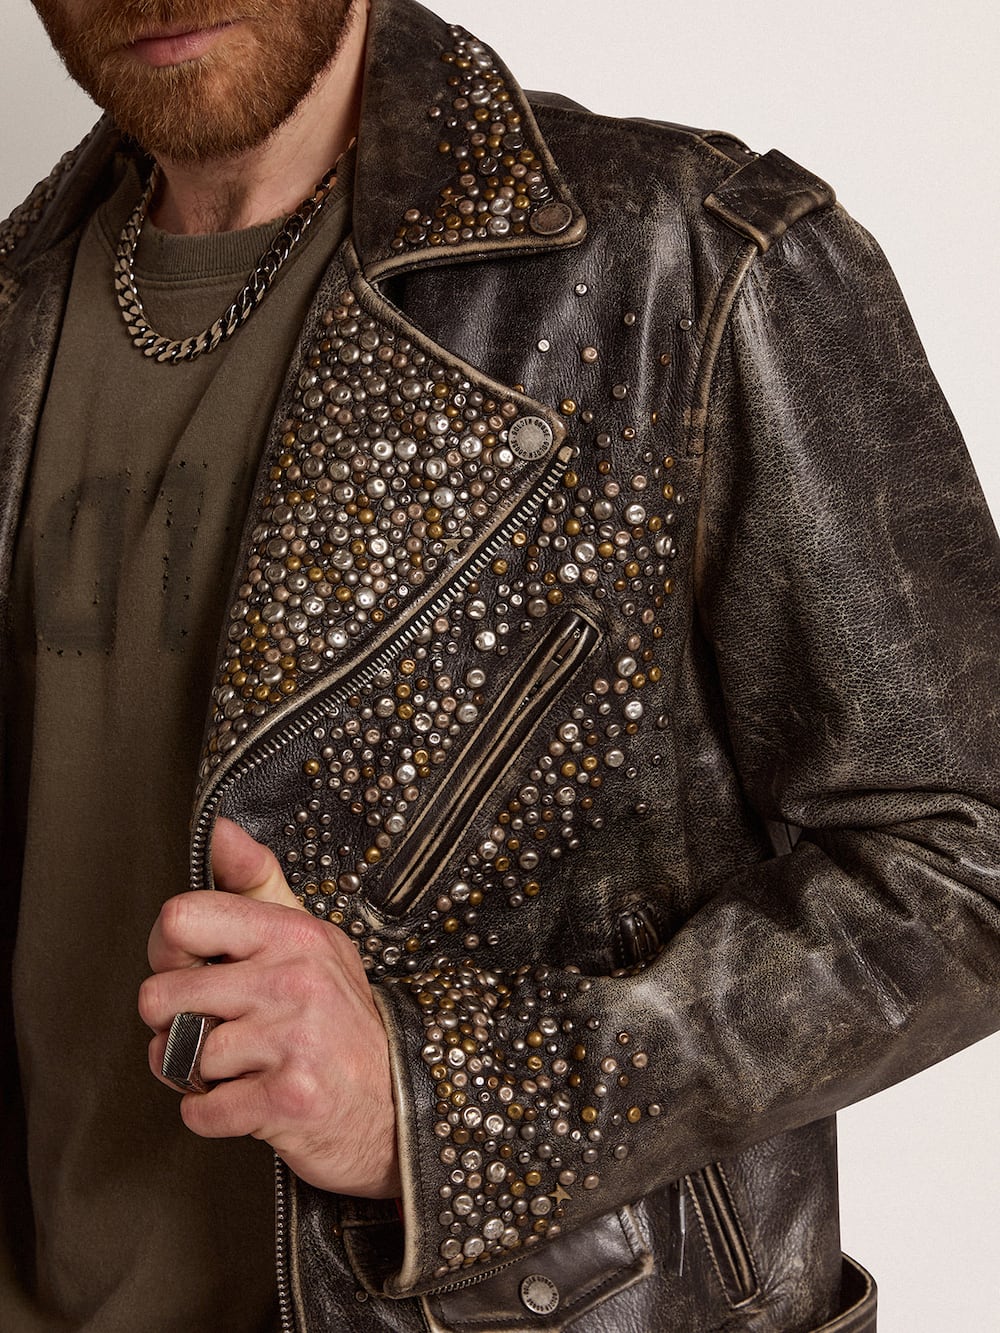 Golden Goose - Men's leather biker jacket with hammered studs and adhesive tape in 